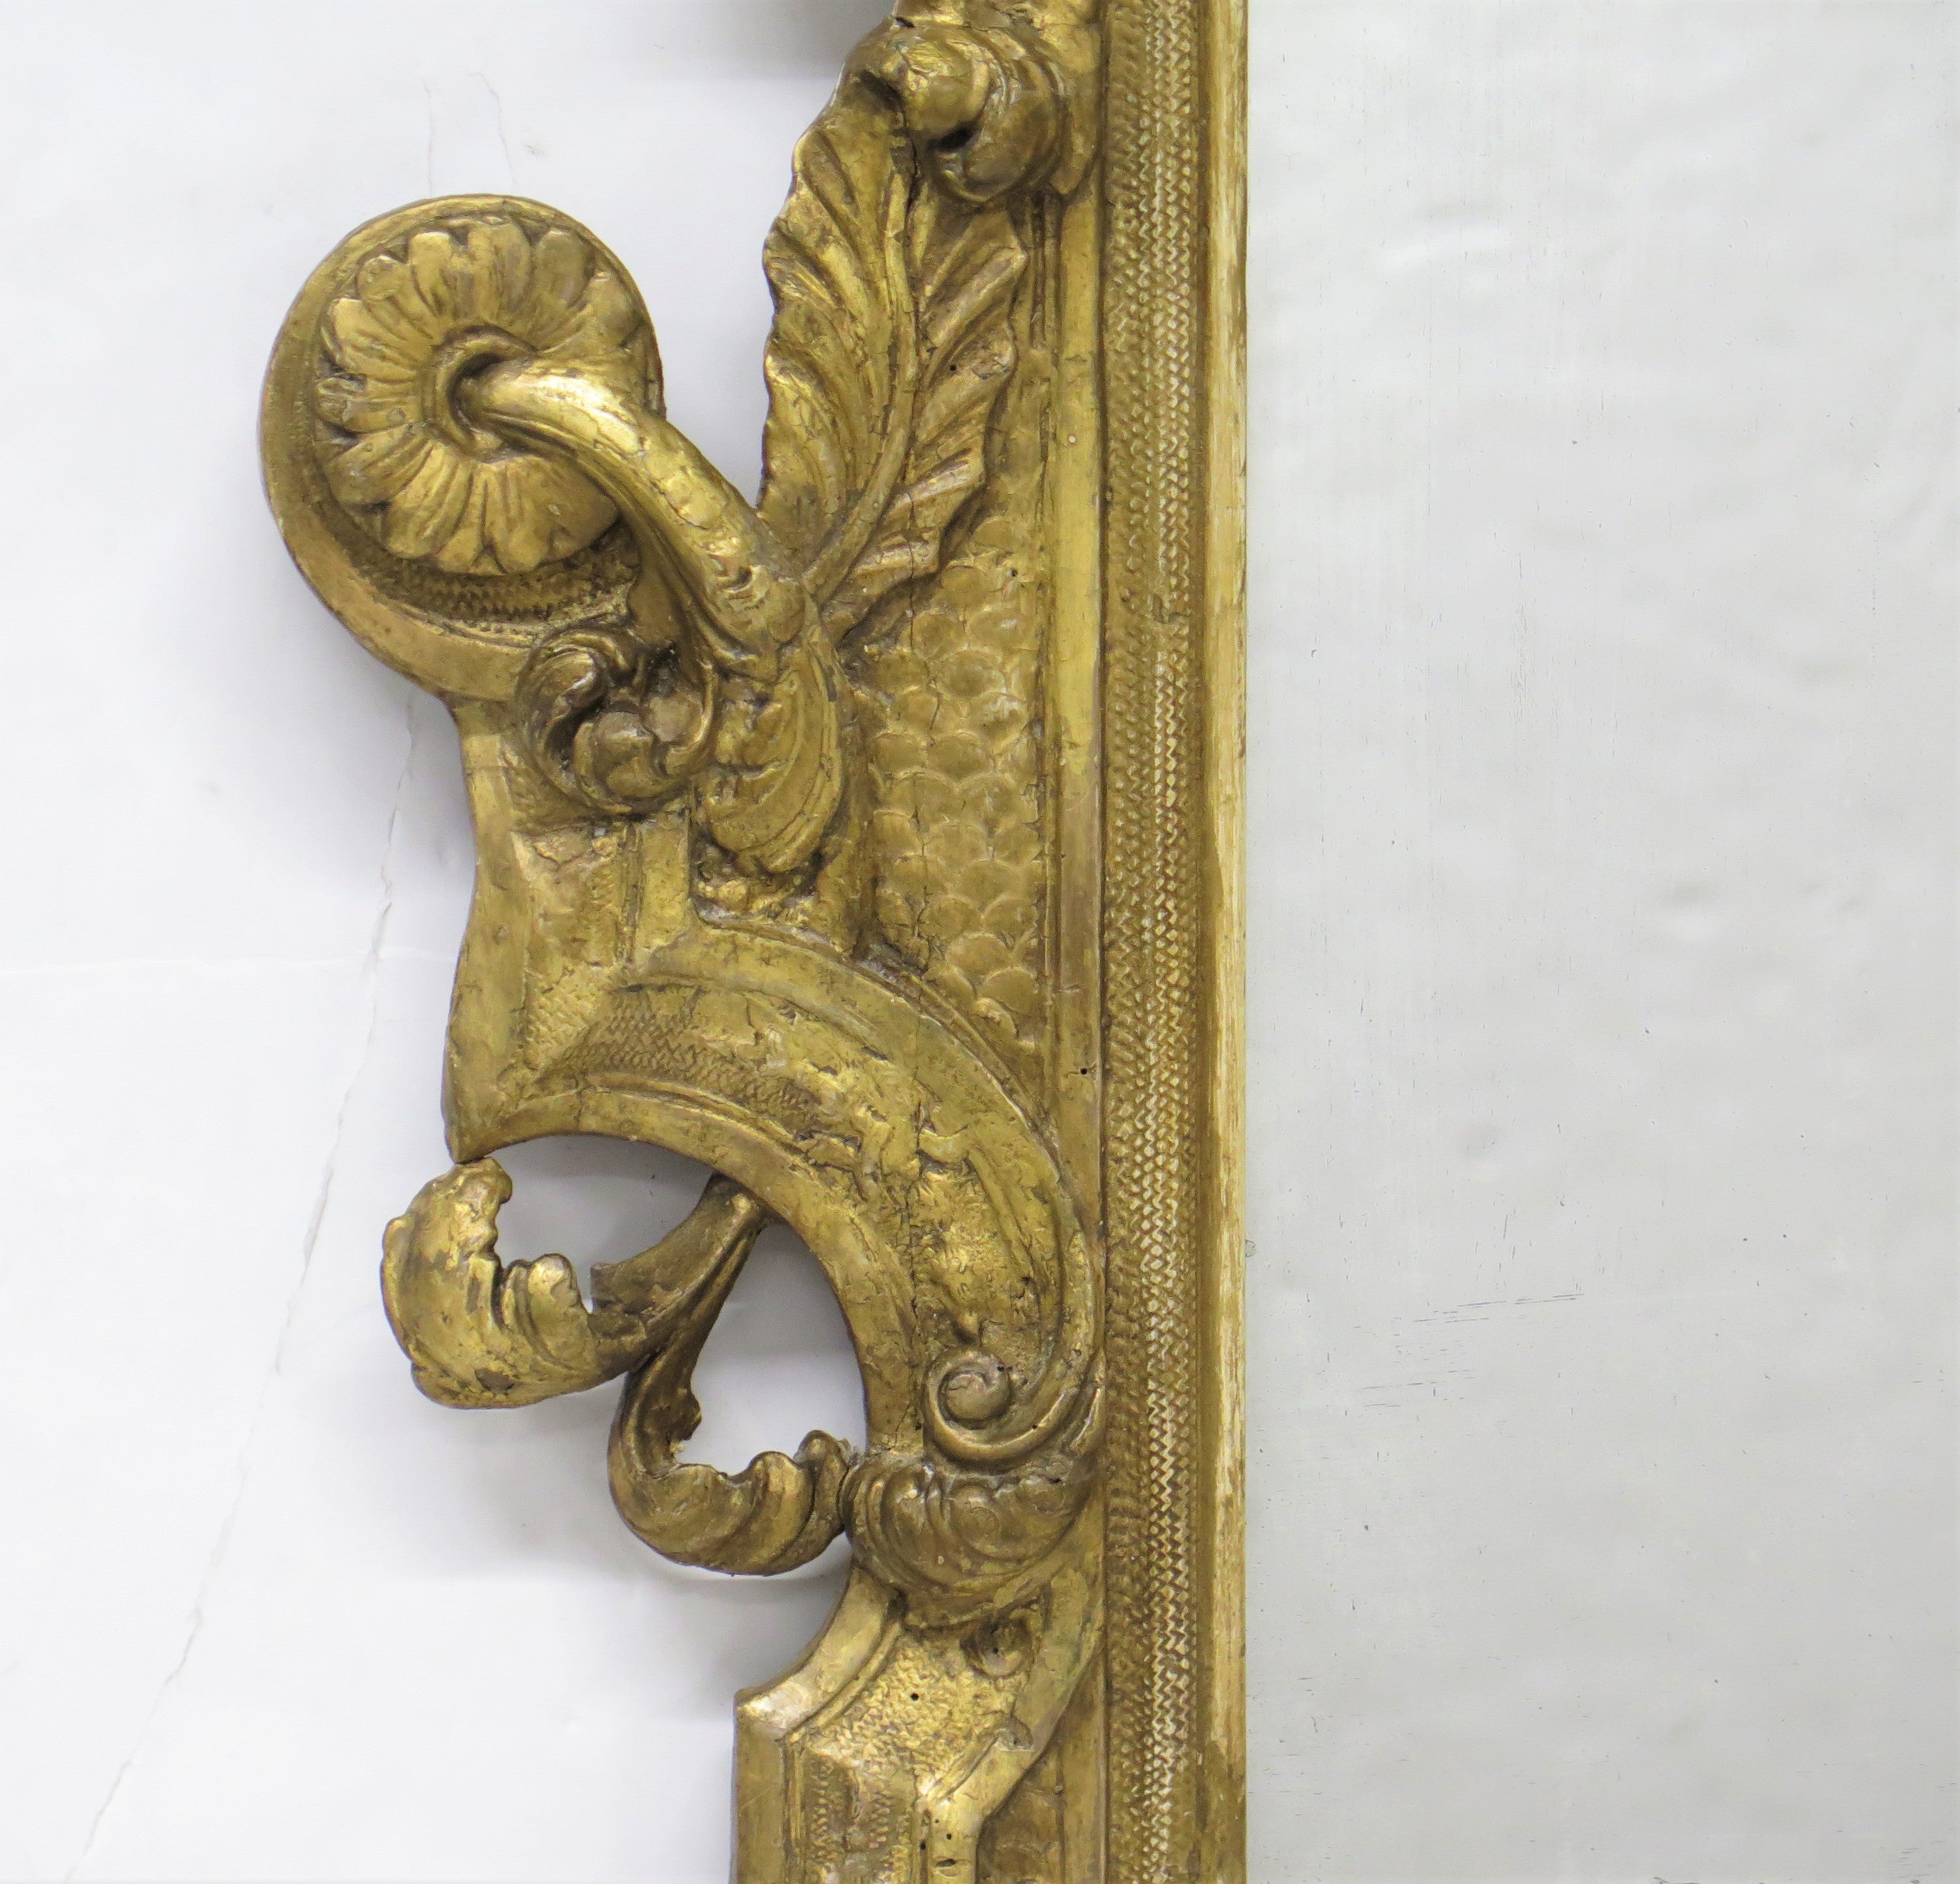 Carved and Gilded Italian Looking Glass / Mirror